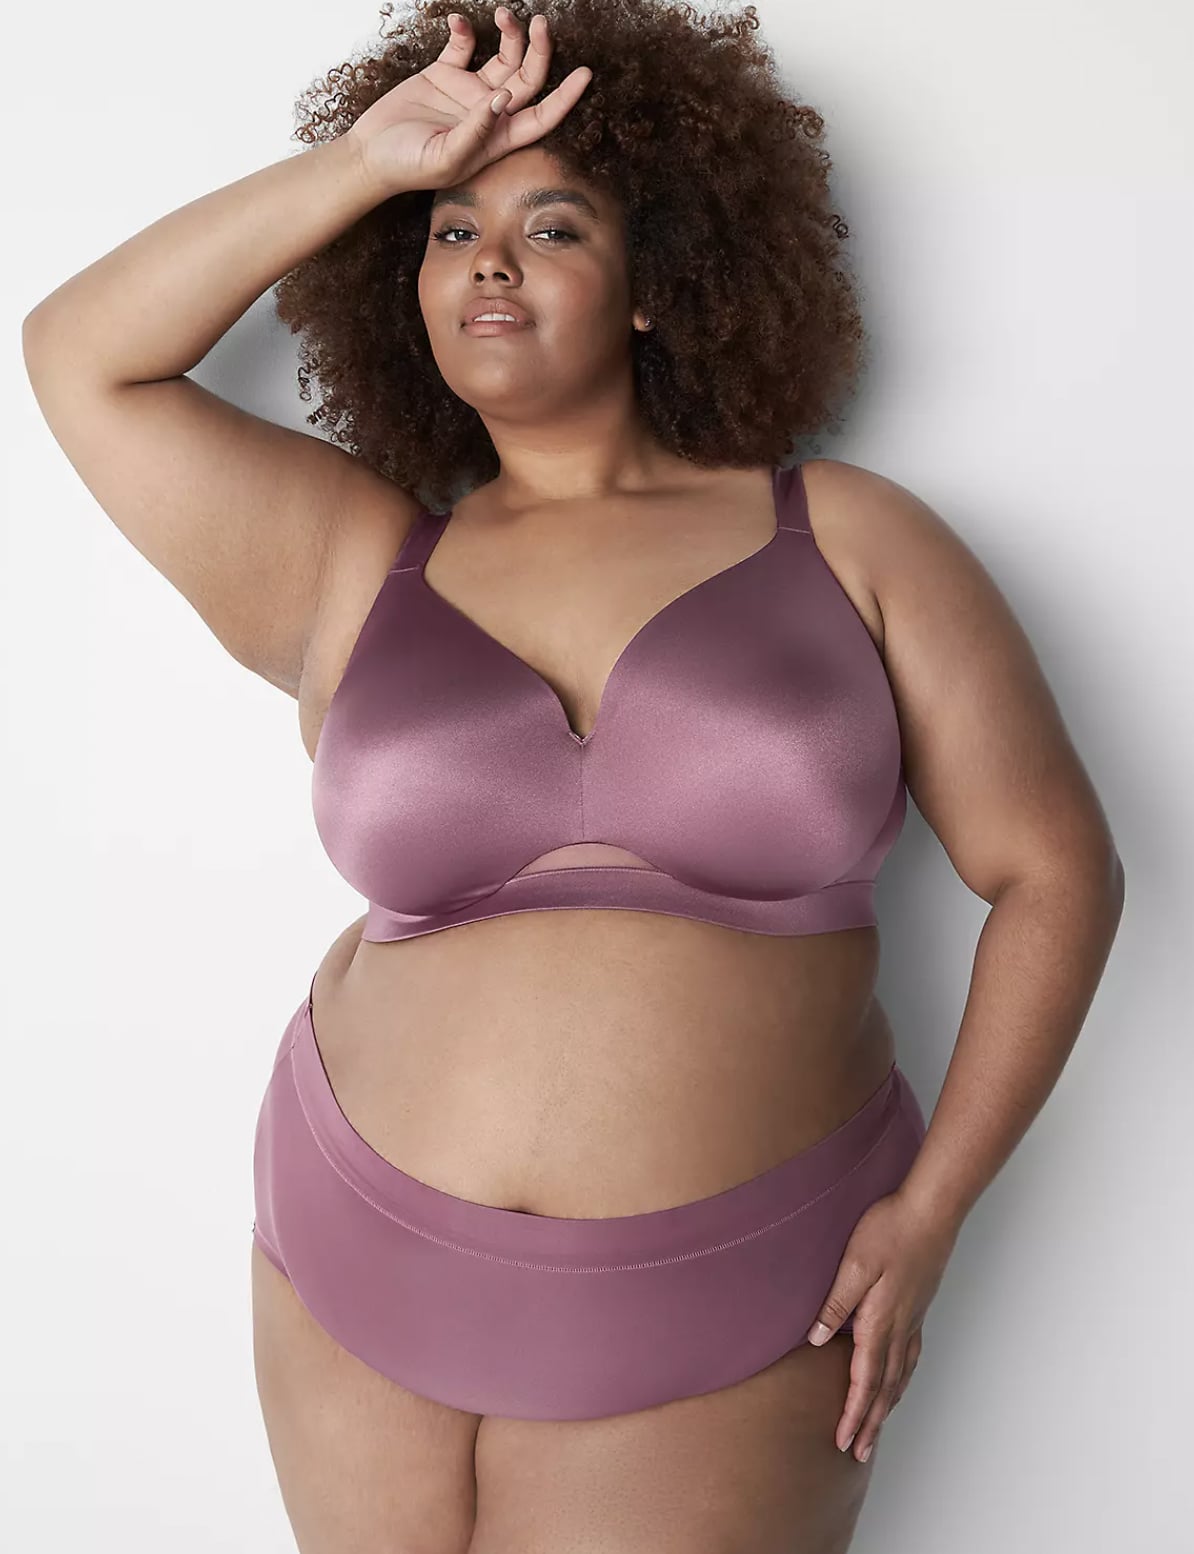 Large Busted Bras to Fit Women with Full Busted Silhouettes